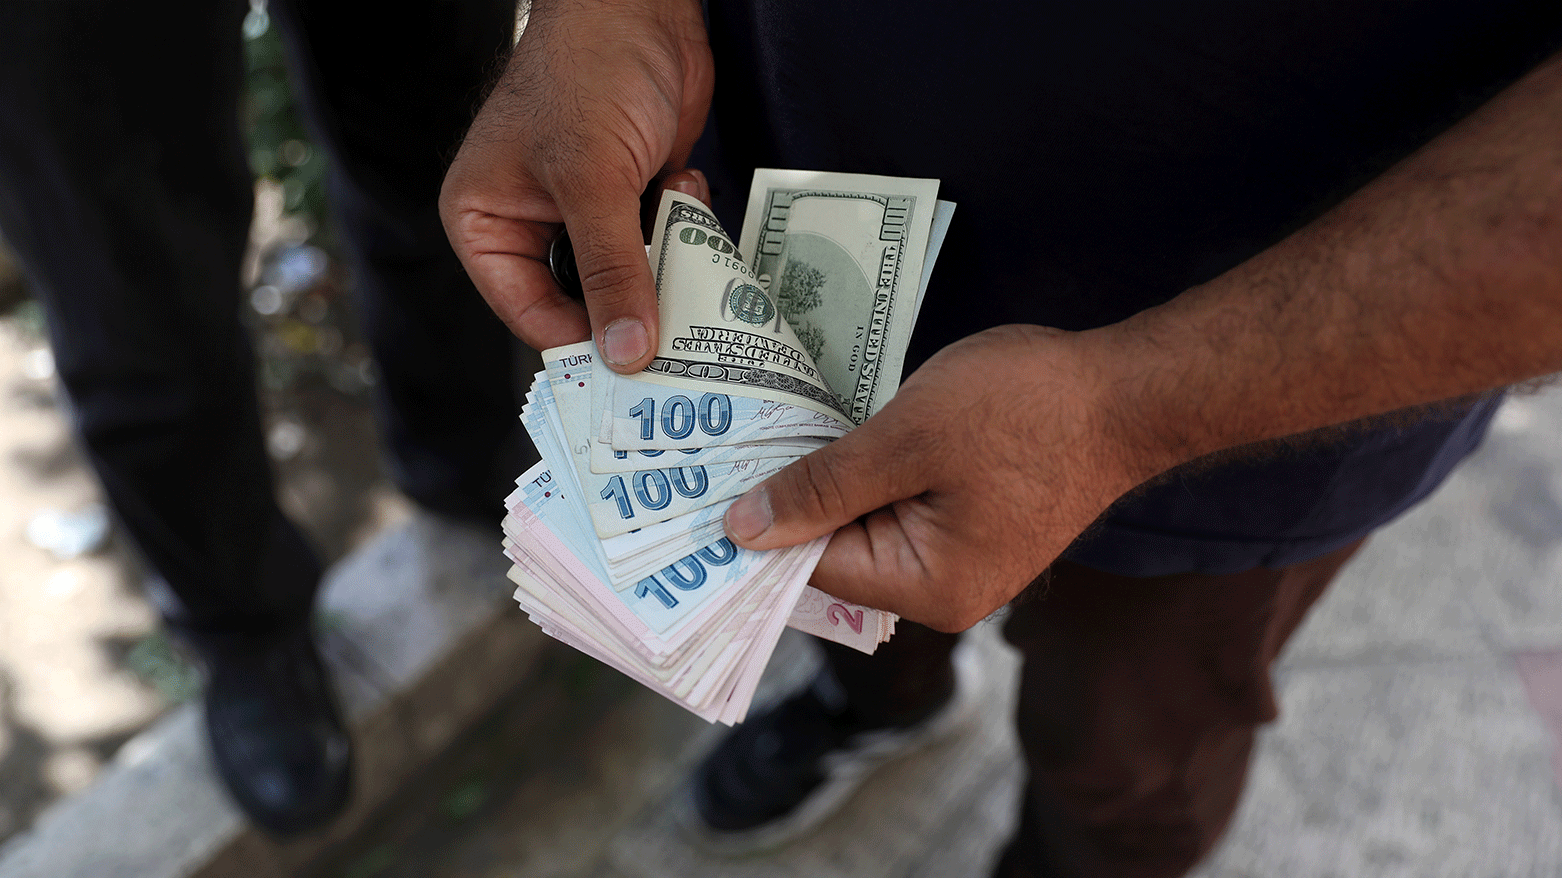 A street money exchanger poses for a photo without showing his face as he counts foreign banknotes in Ferdowsi street, Tehran's go-to venue for foreign currency exchange, Iran, June 12, 2022. (Photo: AP)